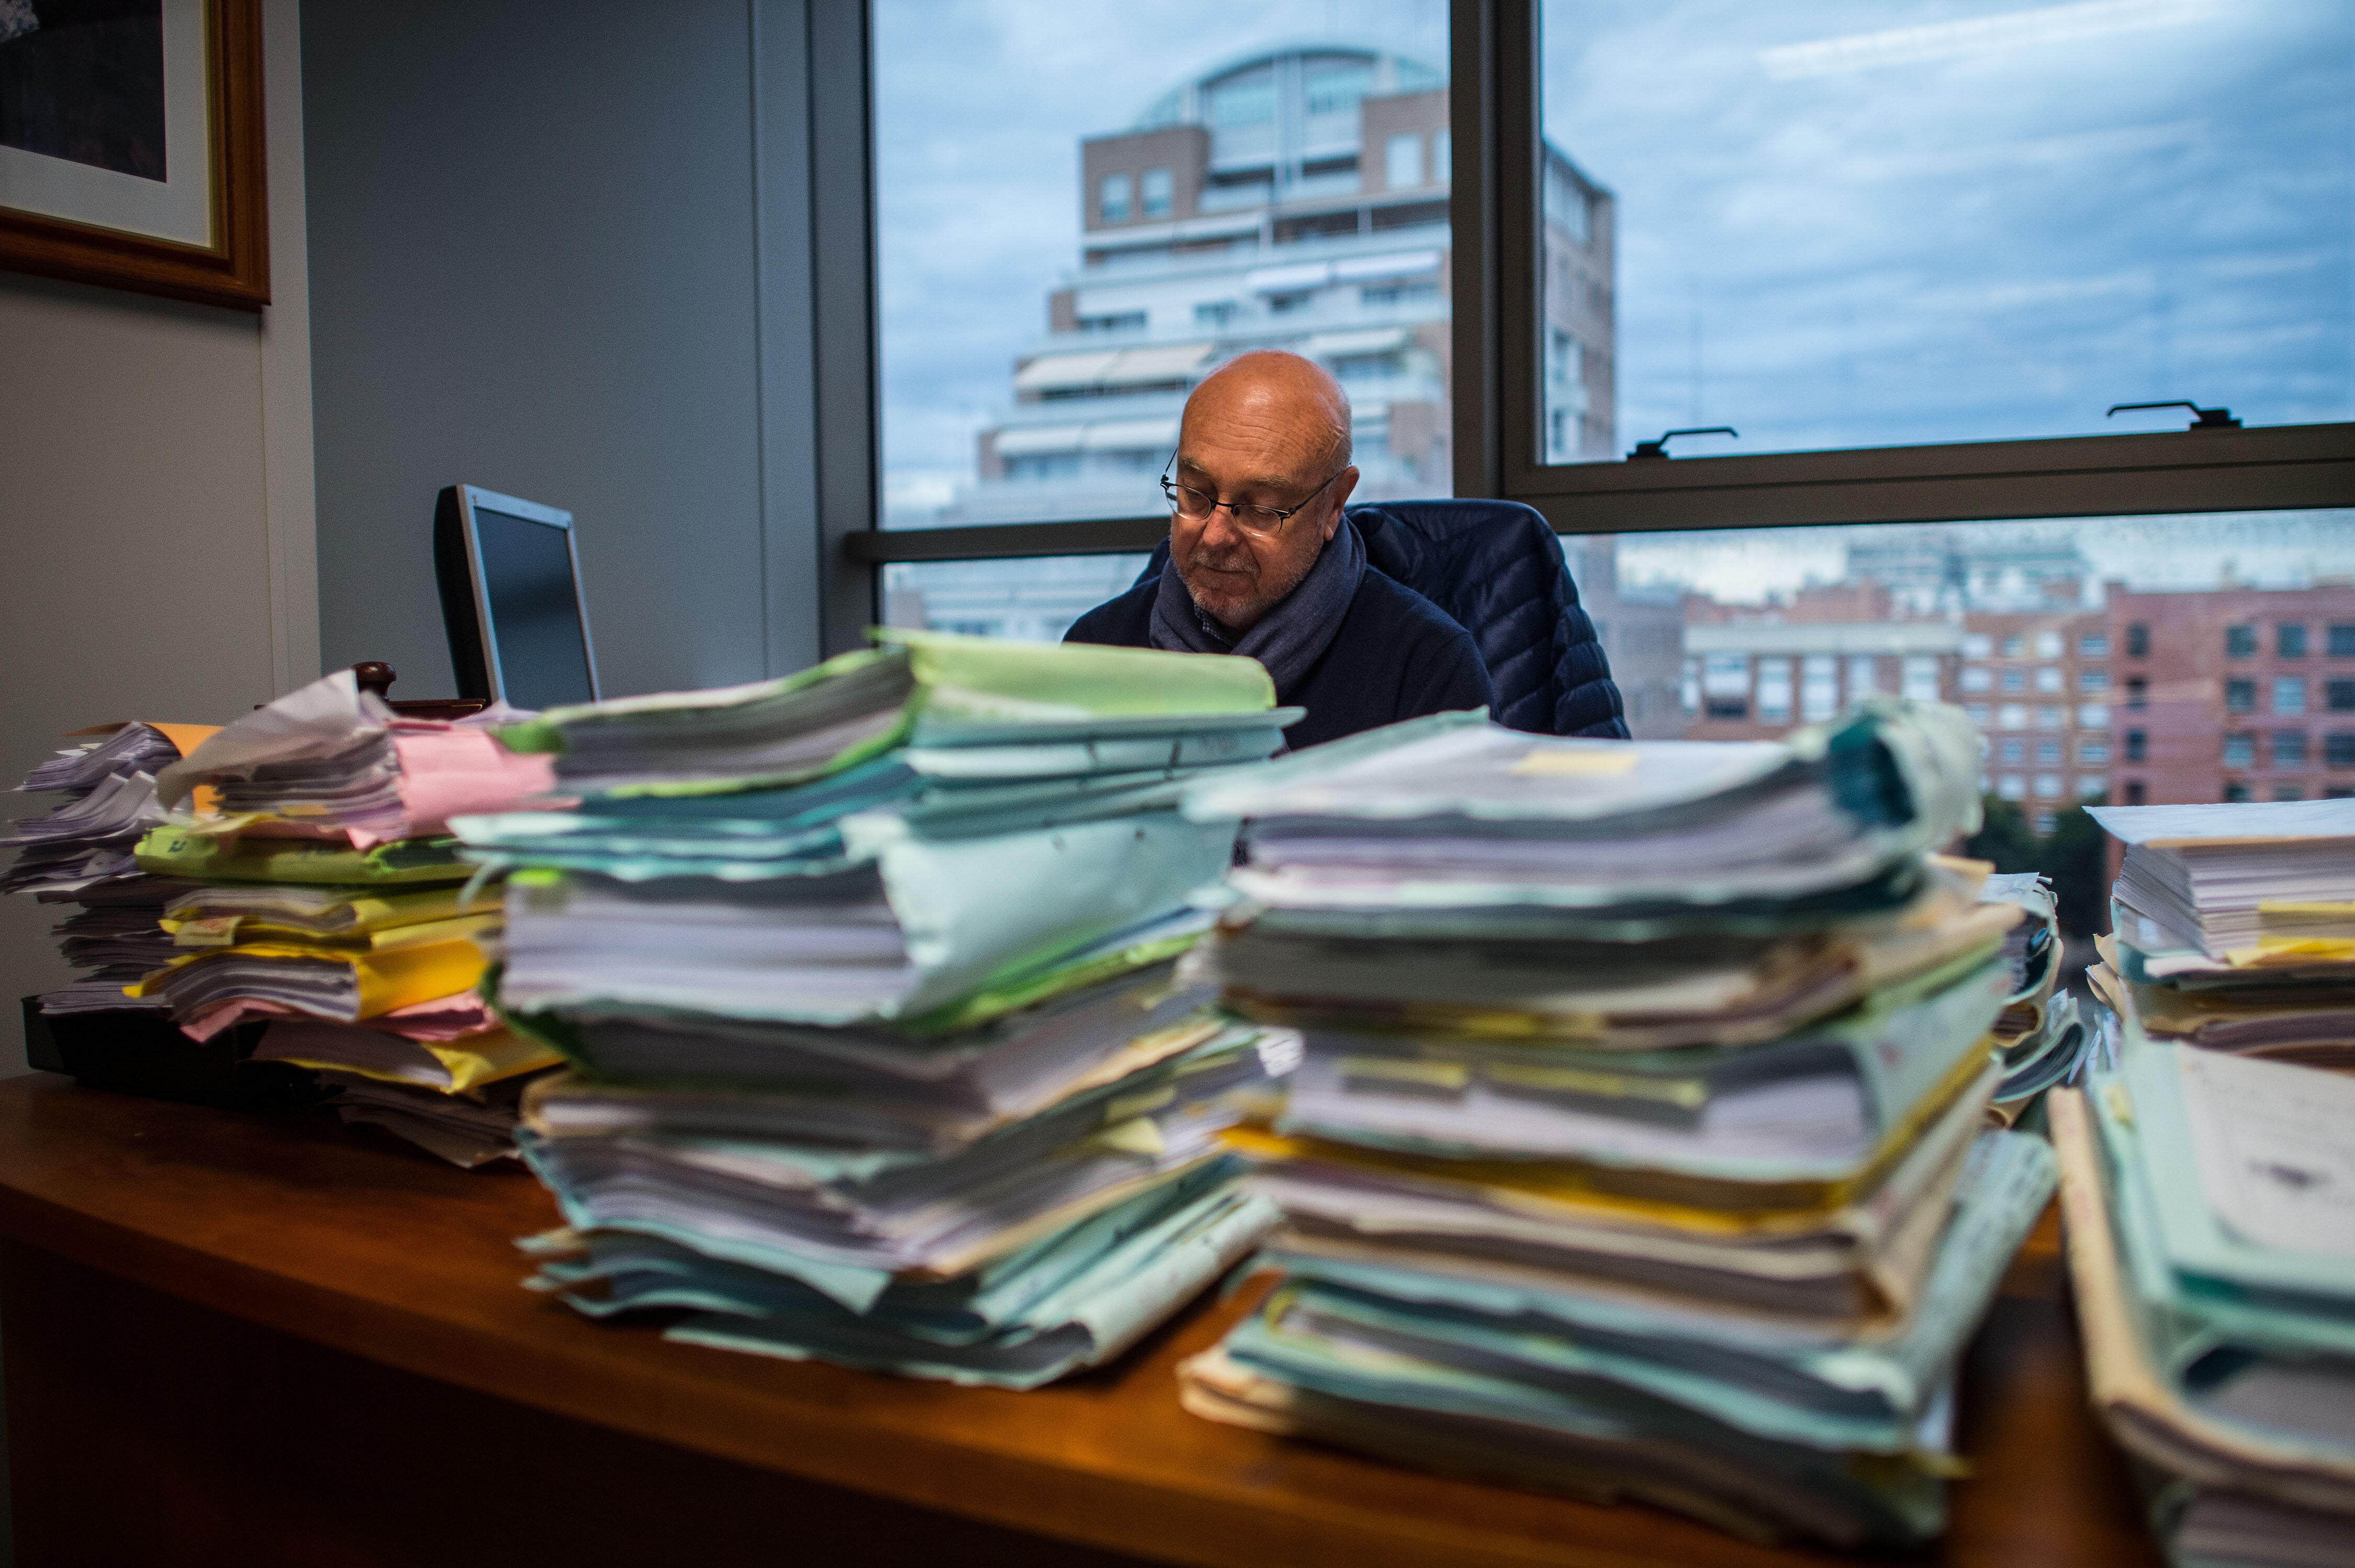 VALENCIA, SPAIN - FEBRUARY 04:  Judge of the Commercial Court number 3, Jose Maria Cutillas works in his office on February 4, 2015 in Valencia, Spain. The Commercial Court number 3 of Valencia is one of the most overloaded courts across Spain. Last year 